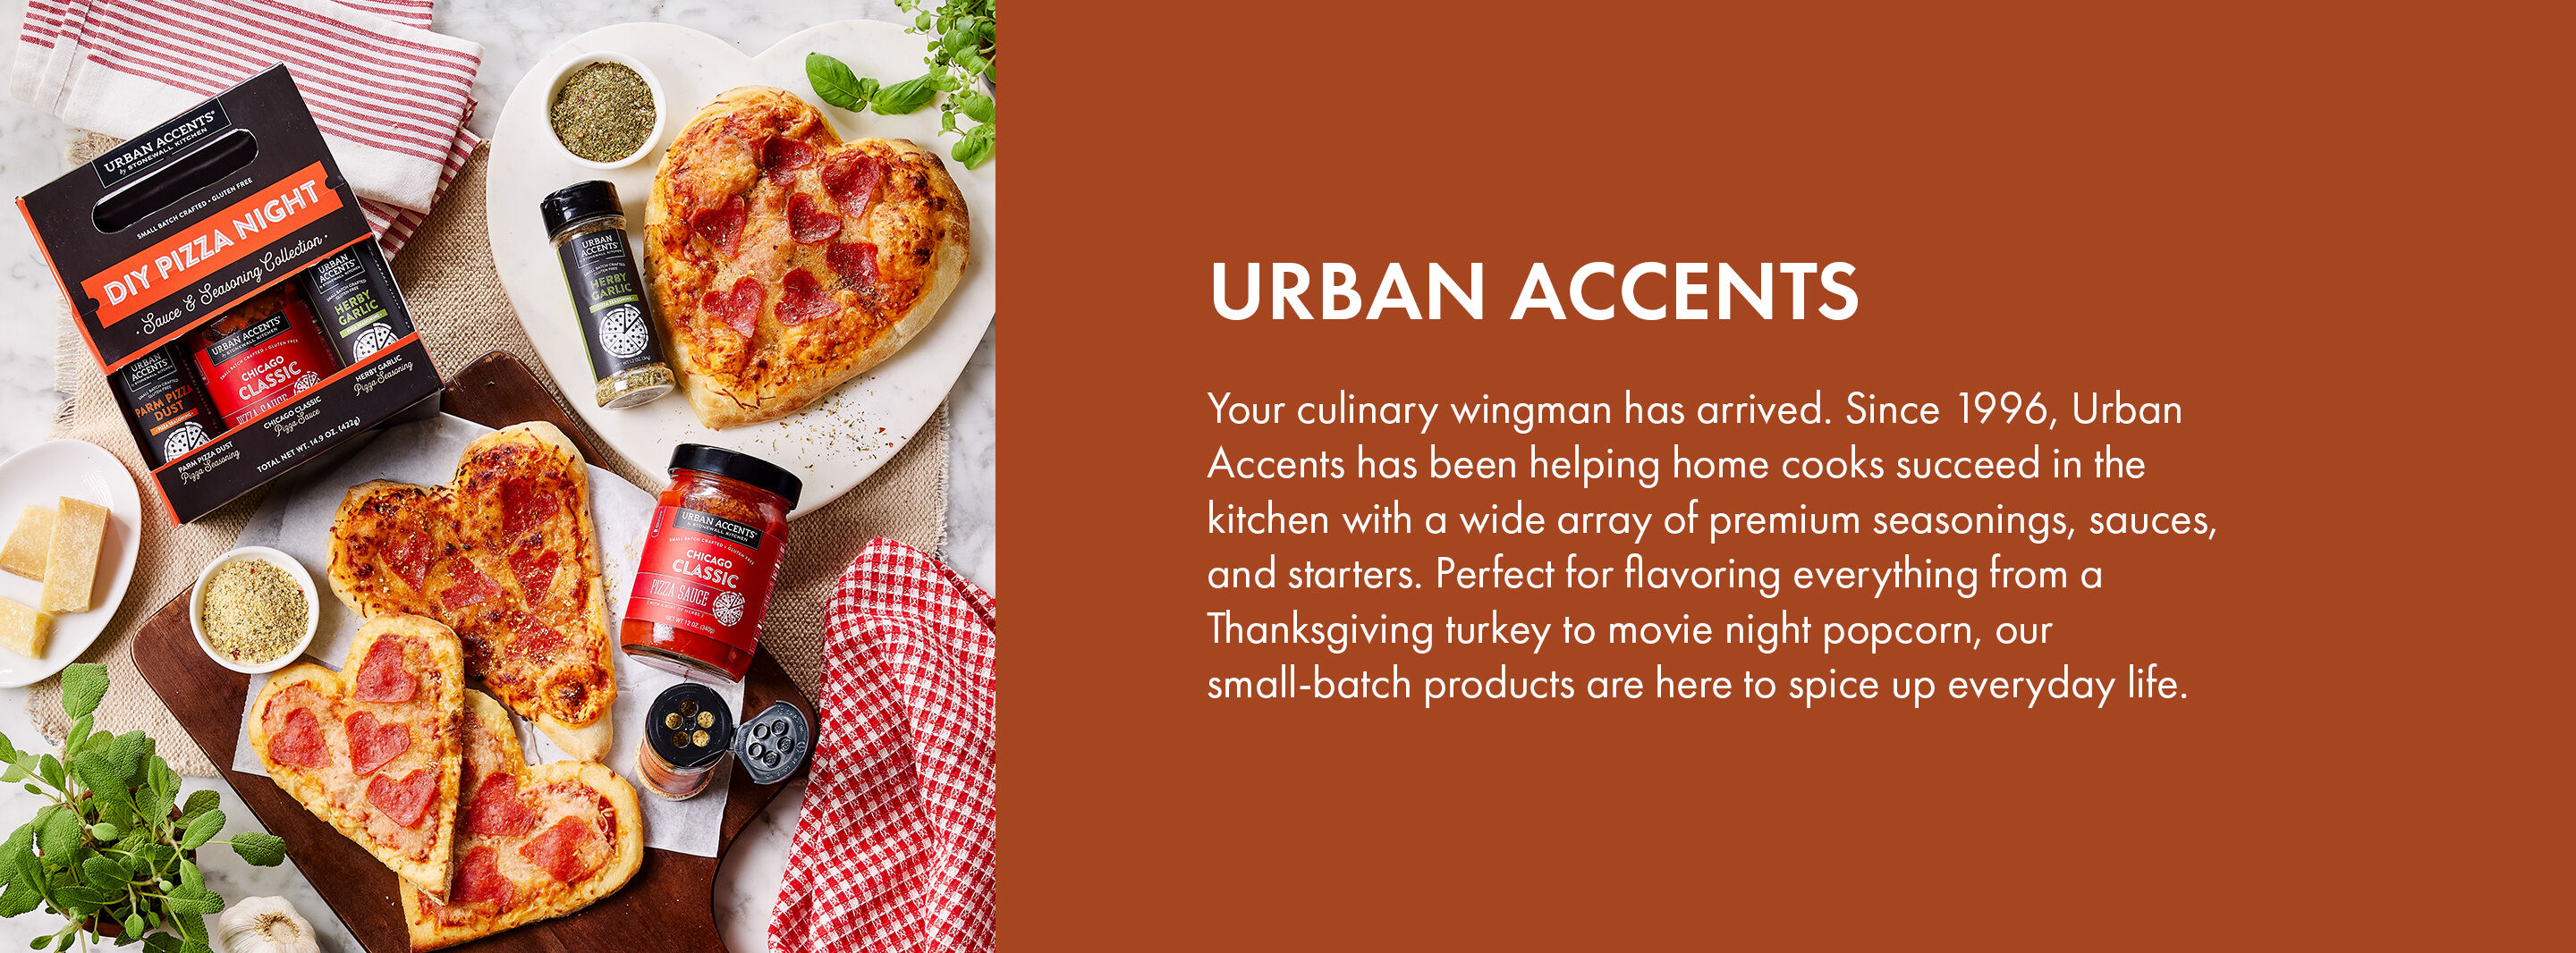 Urban Accents | Your culinary wingman has arrived. Since 1996, Urban Accents has been helping home cooks succeed in the kitchen with a wide array of premium seasonings, sauces, and starters. Perfect from flavoring everything from a Thanksgiving turkey to movie night popcorn, our small-batch products are here to spice up everyday life.